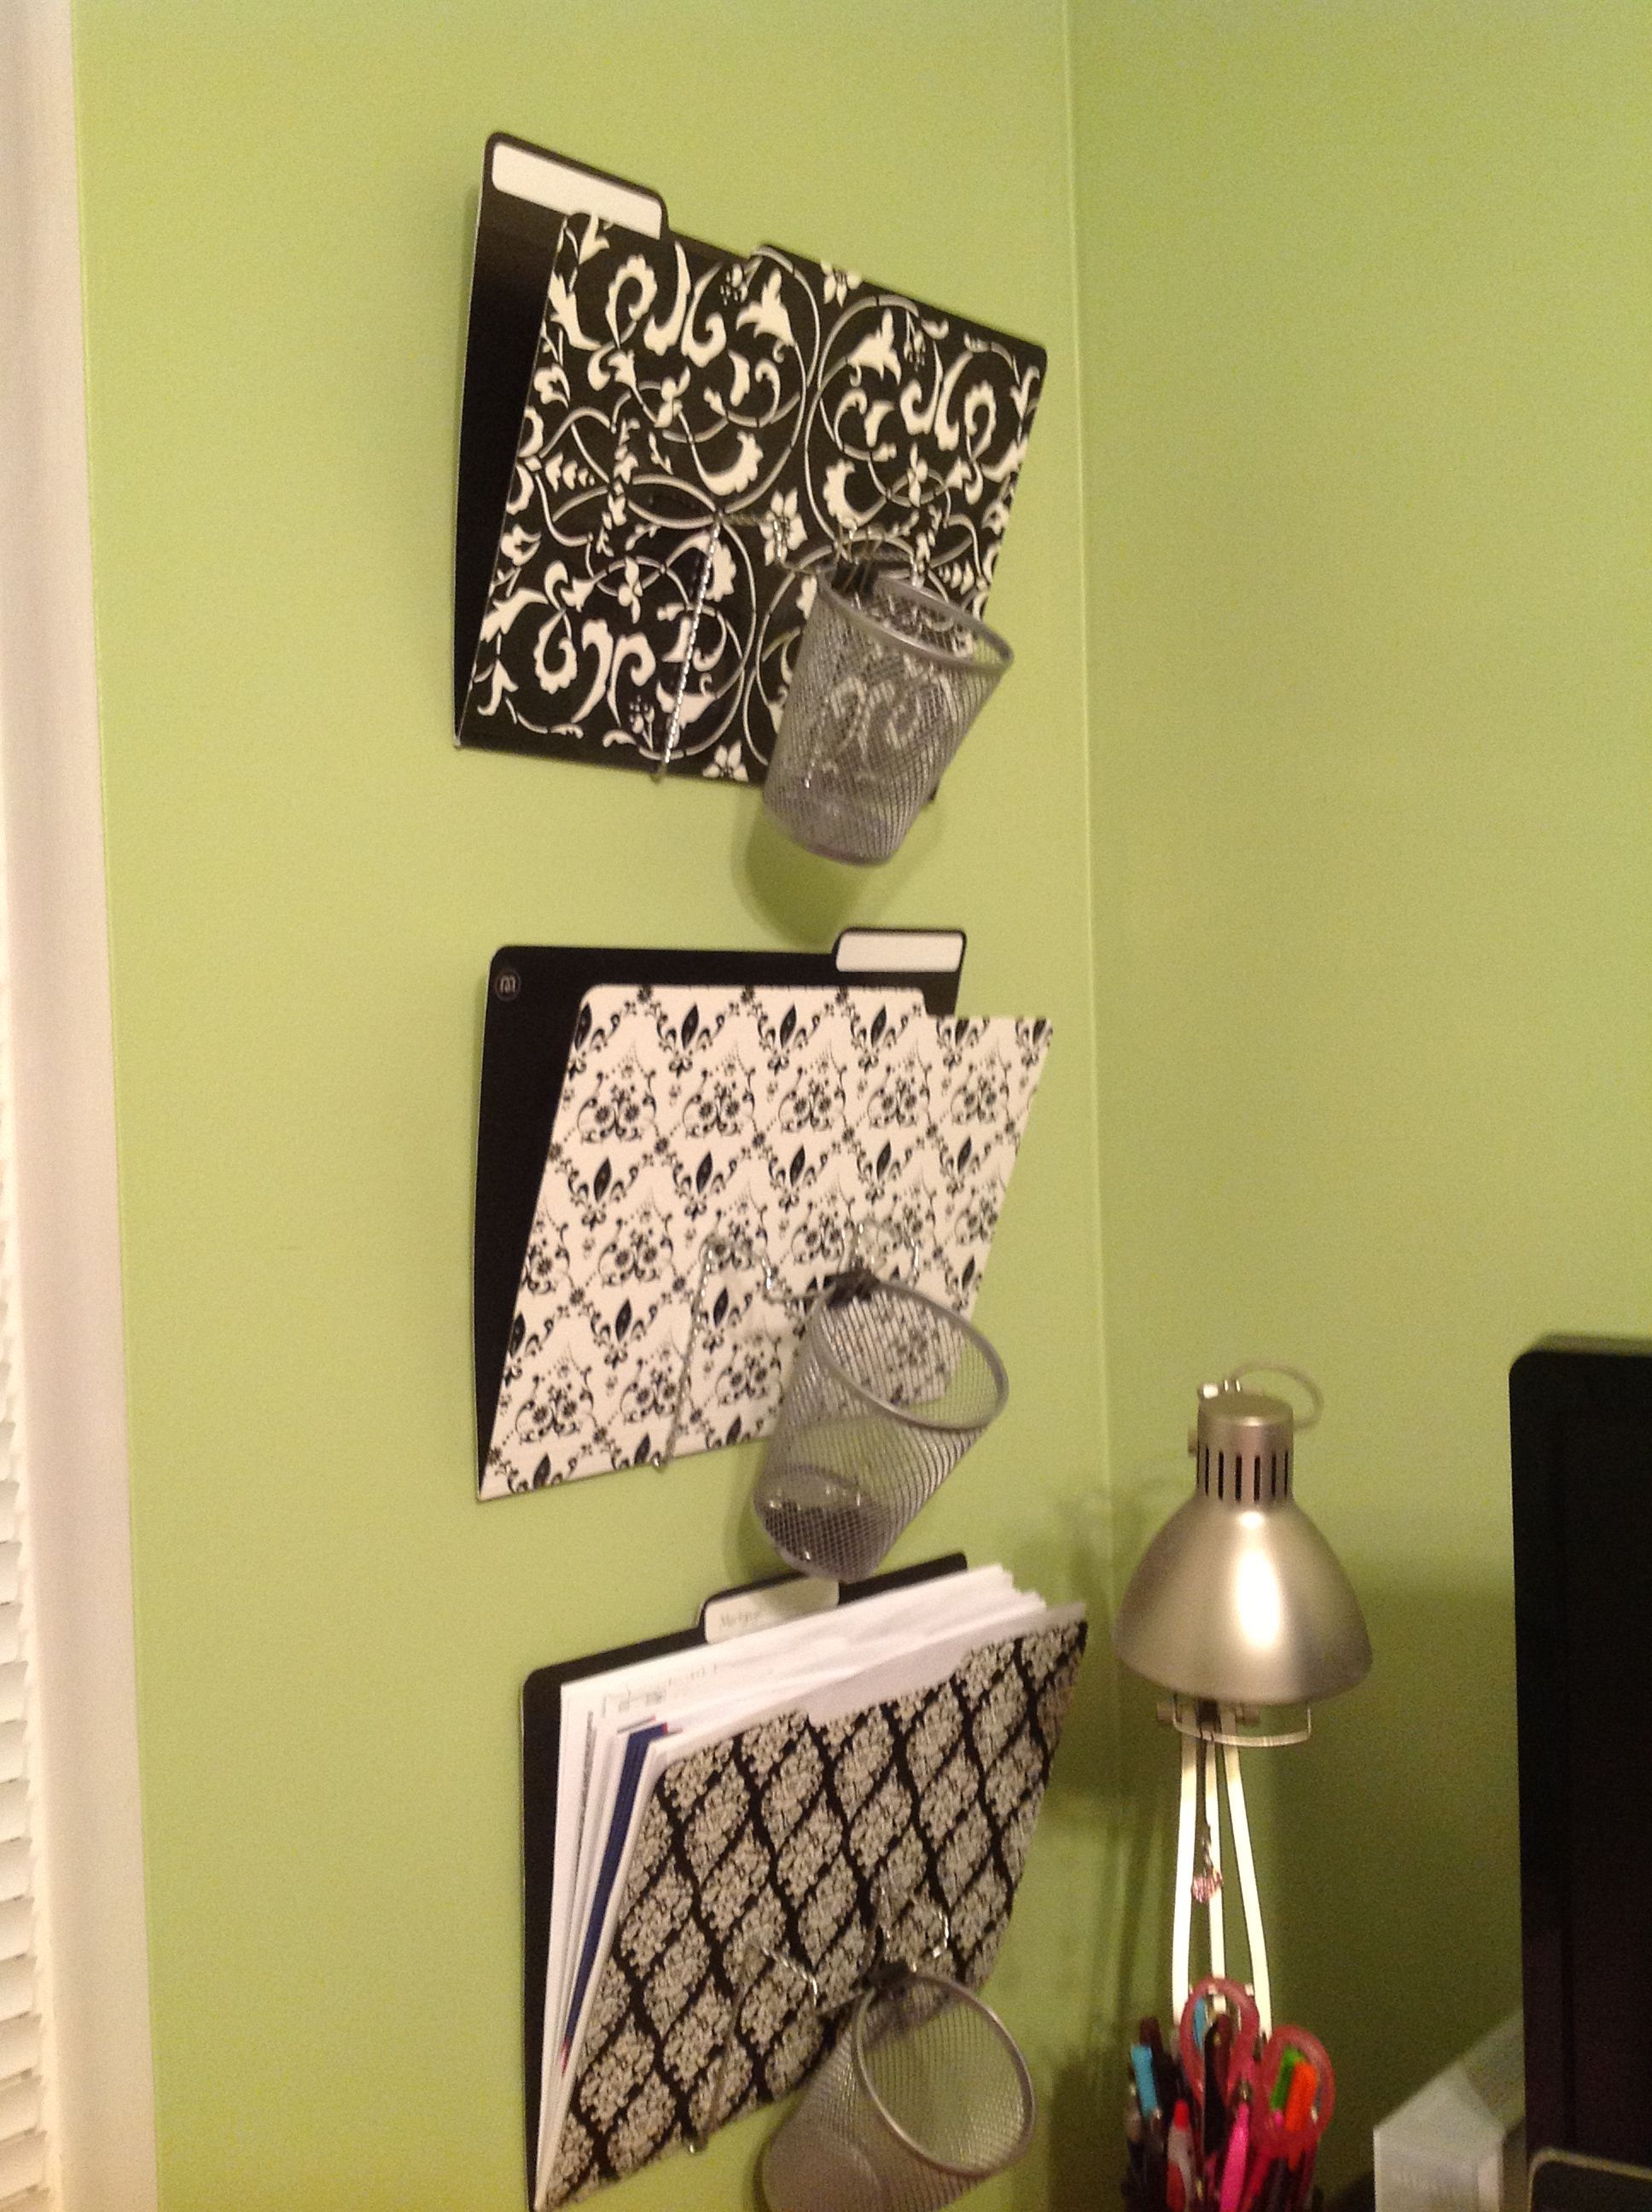 DIY File Rack: Metal display easels, pencil cups, and butterfly clips from Dolla